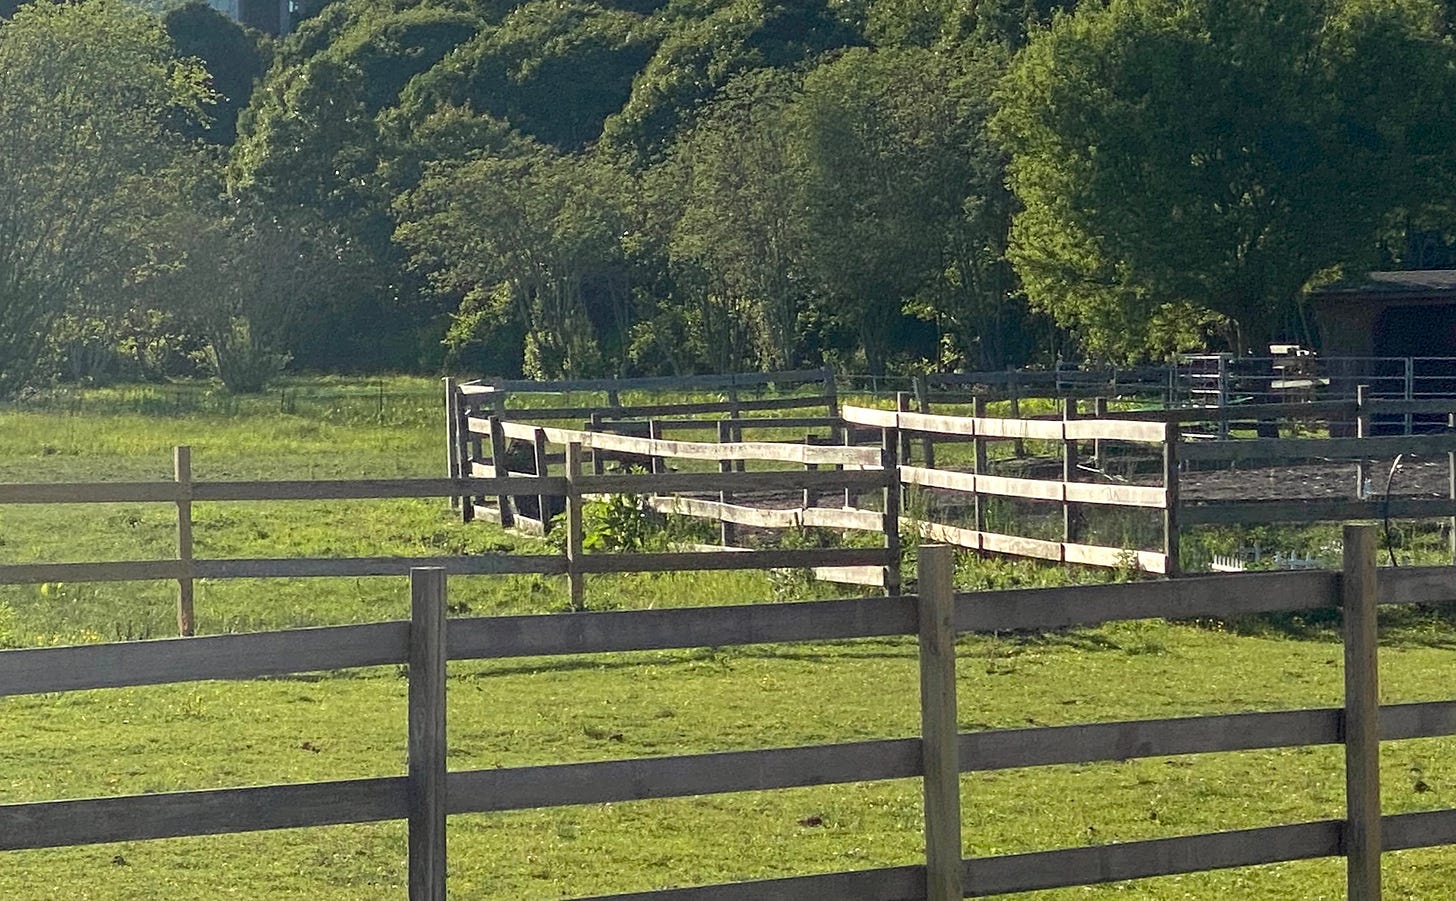 A photograph of horse paddocks in the afternoon light with lush grass and vividly green trees beyond.